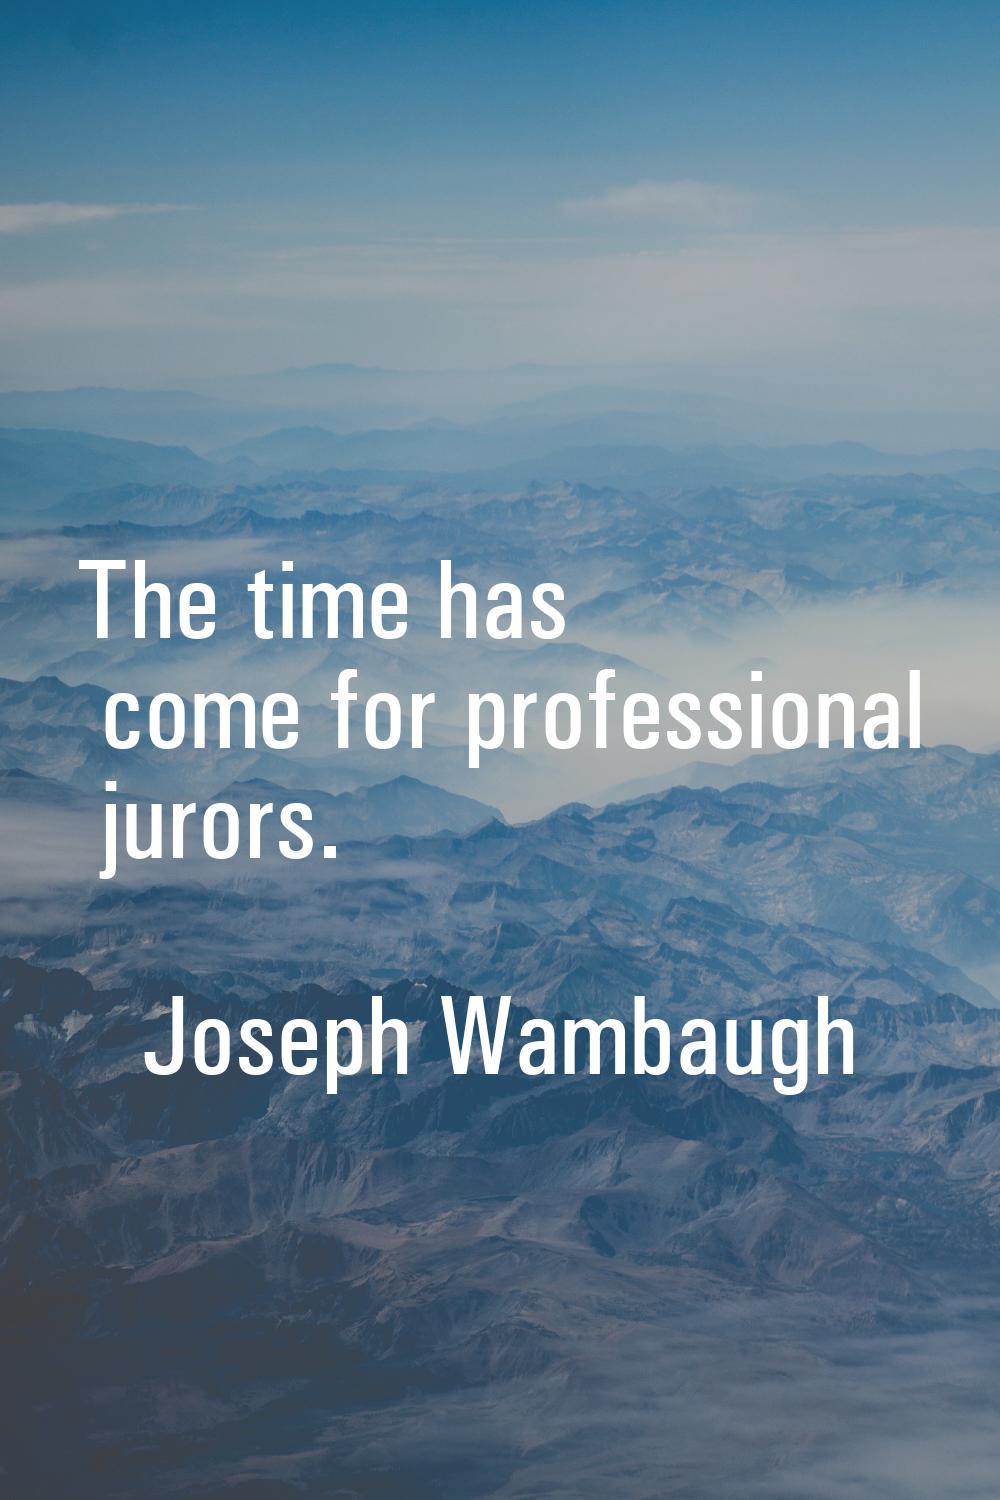 The time has come for professional jurors.